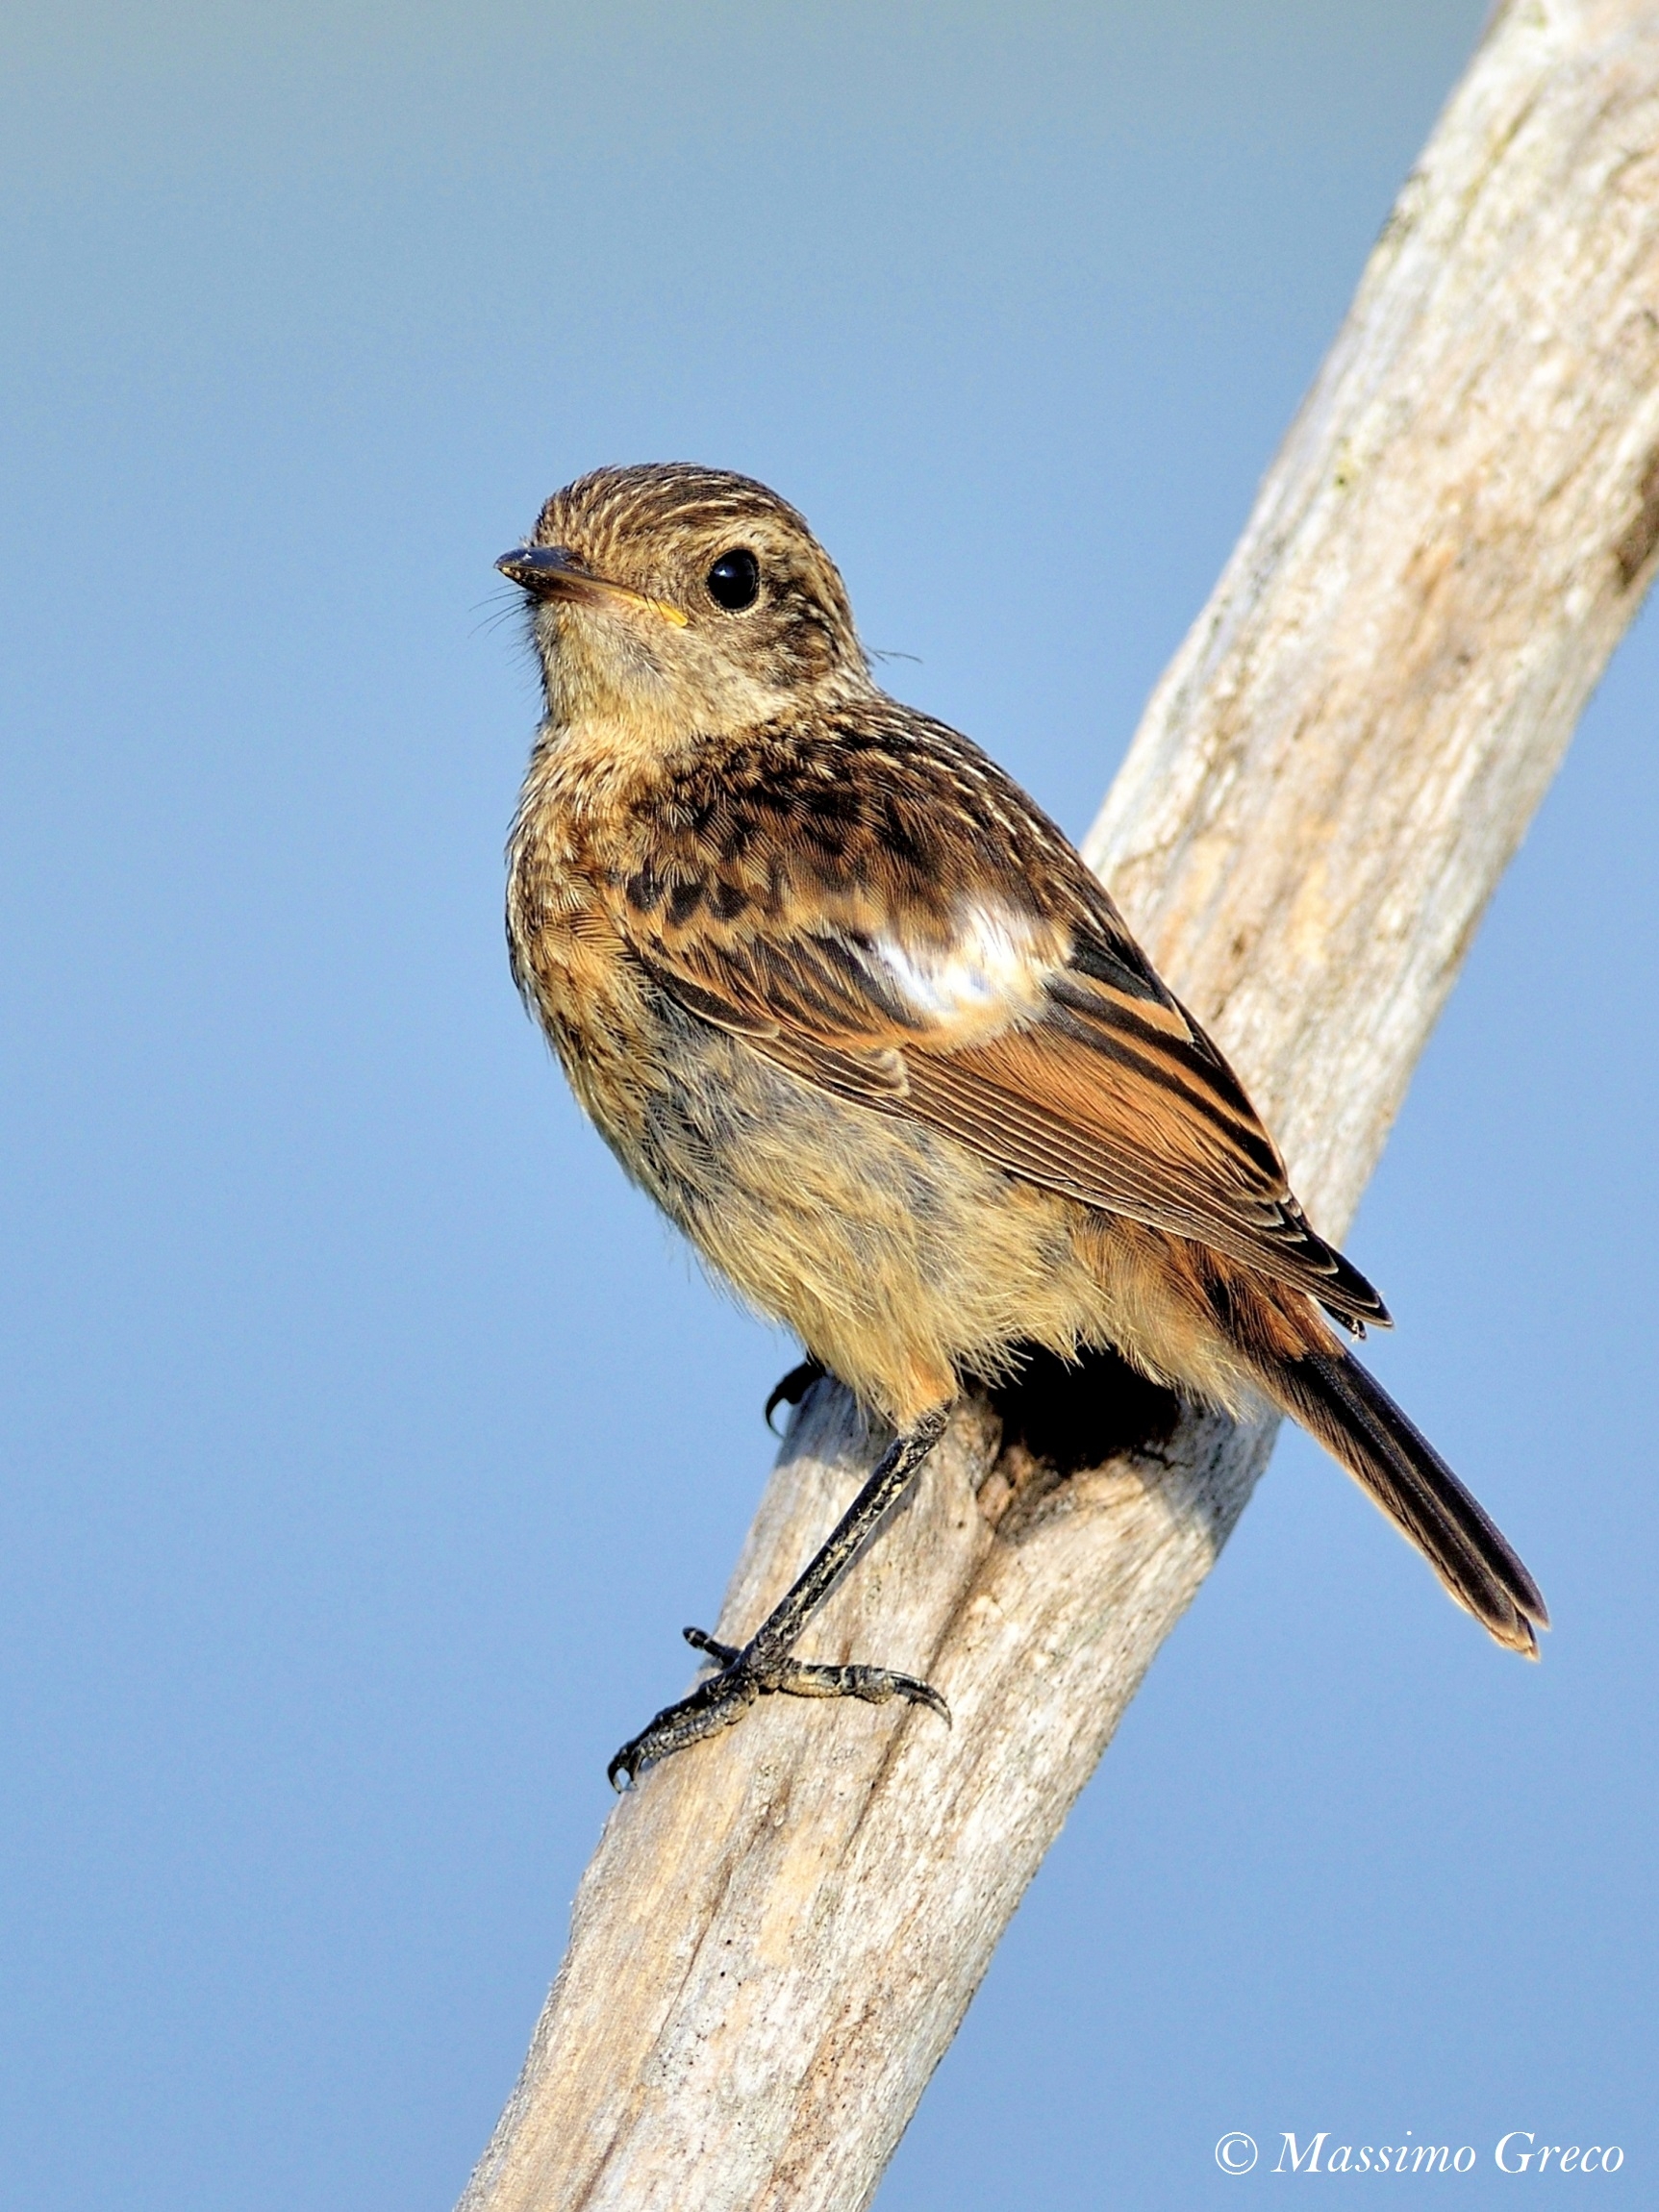 Young Pigliamosche (Striped Muscicapa)...